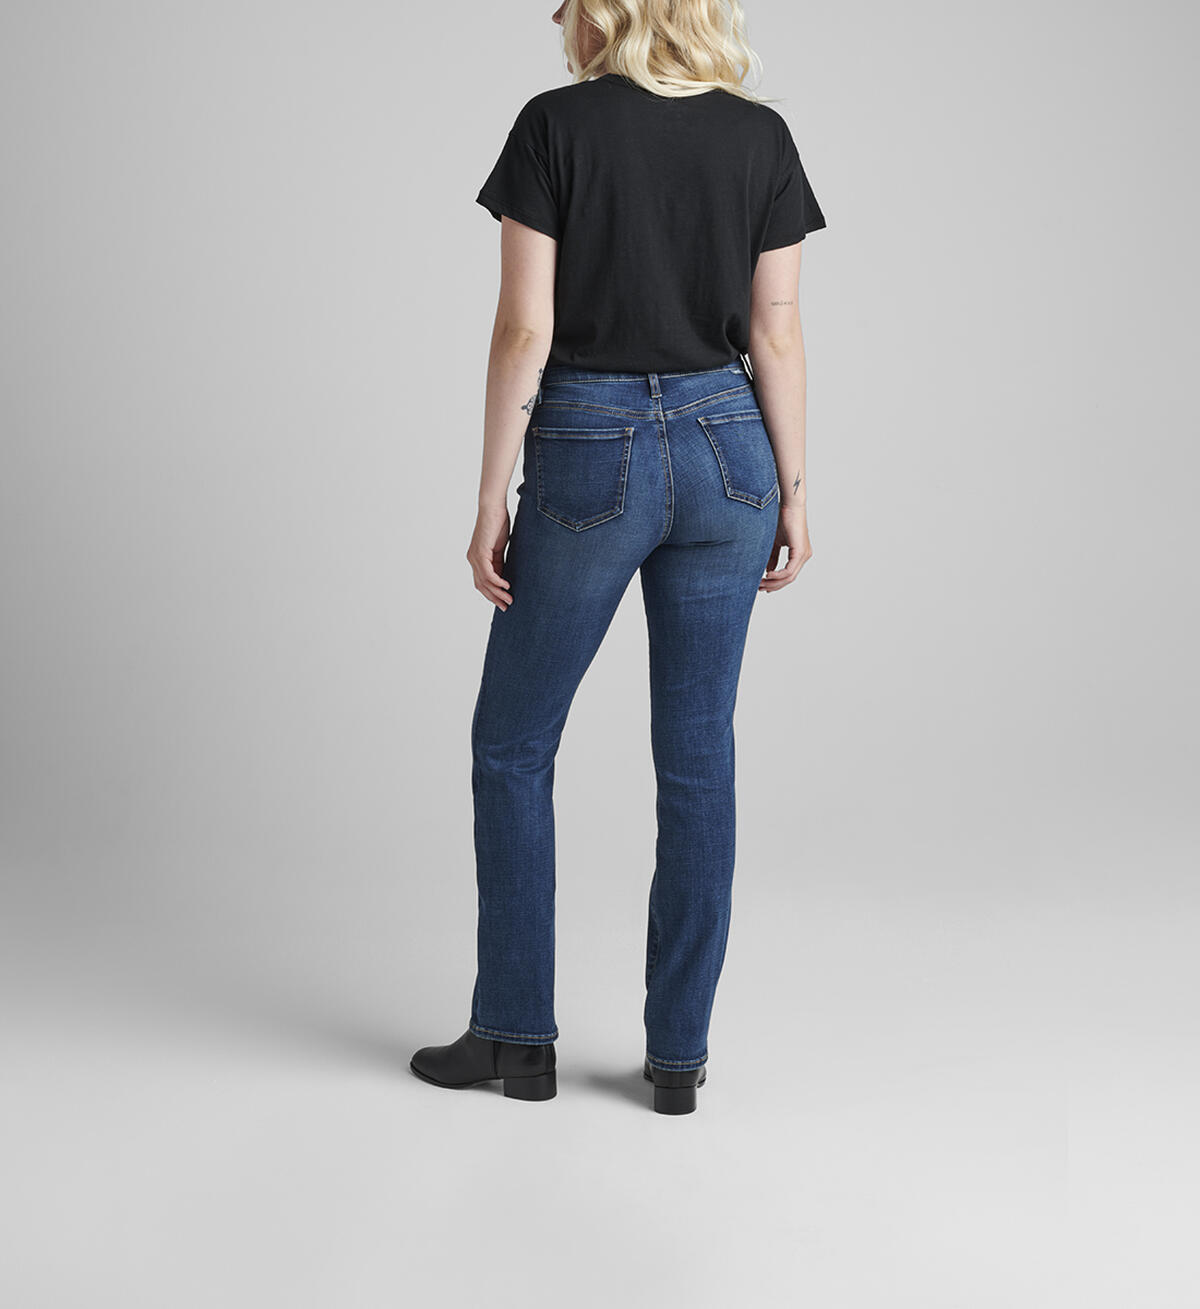 Eloise Mid Rise Bootcut Jeans Petite, , hi-res image number 1